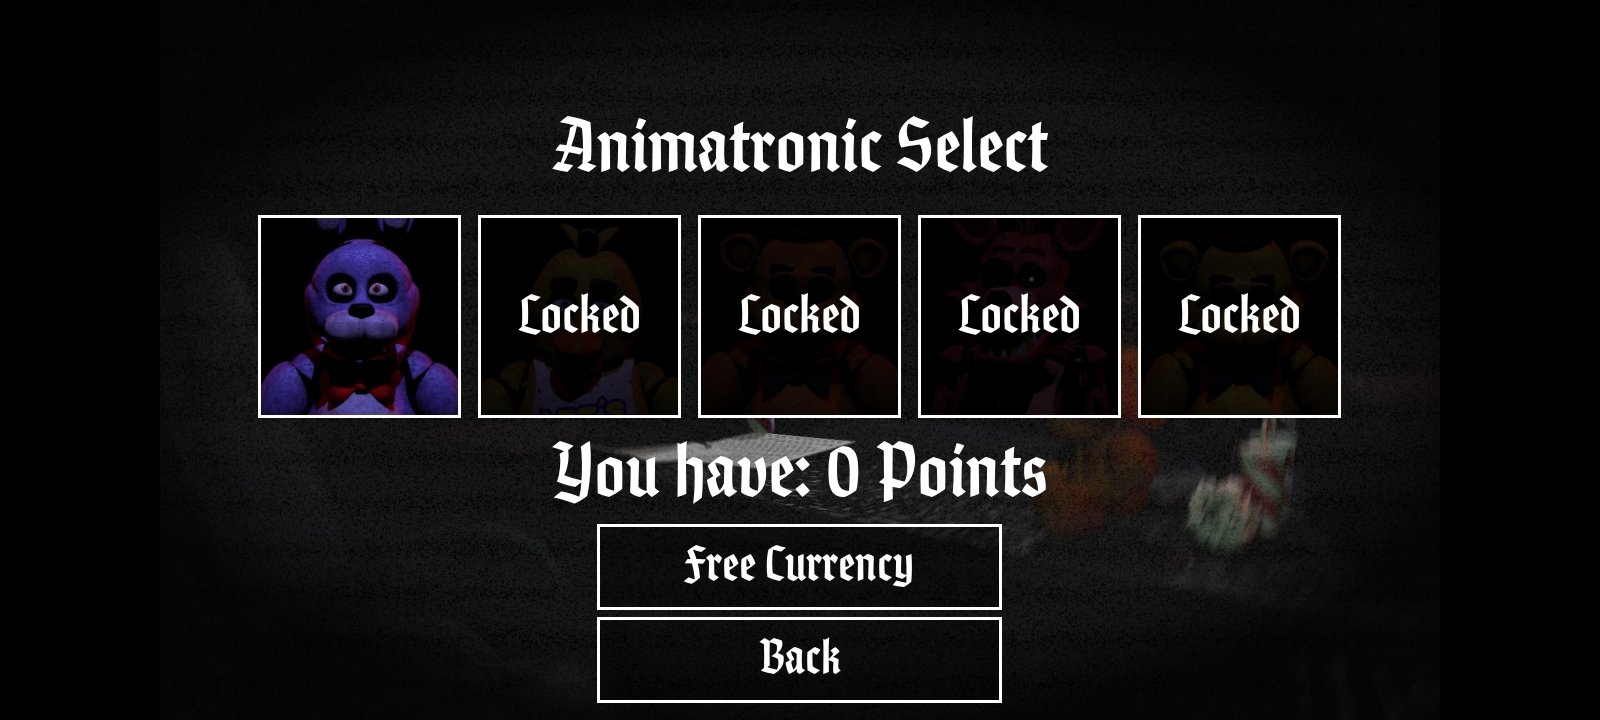 Download Animatronic Salvage android on PC